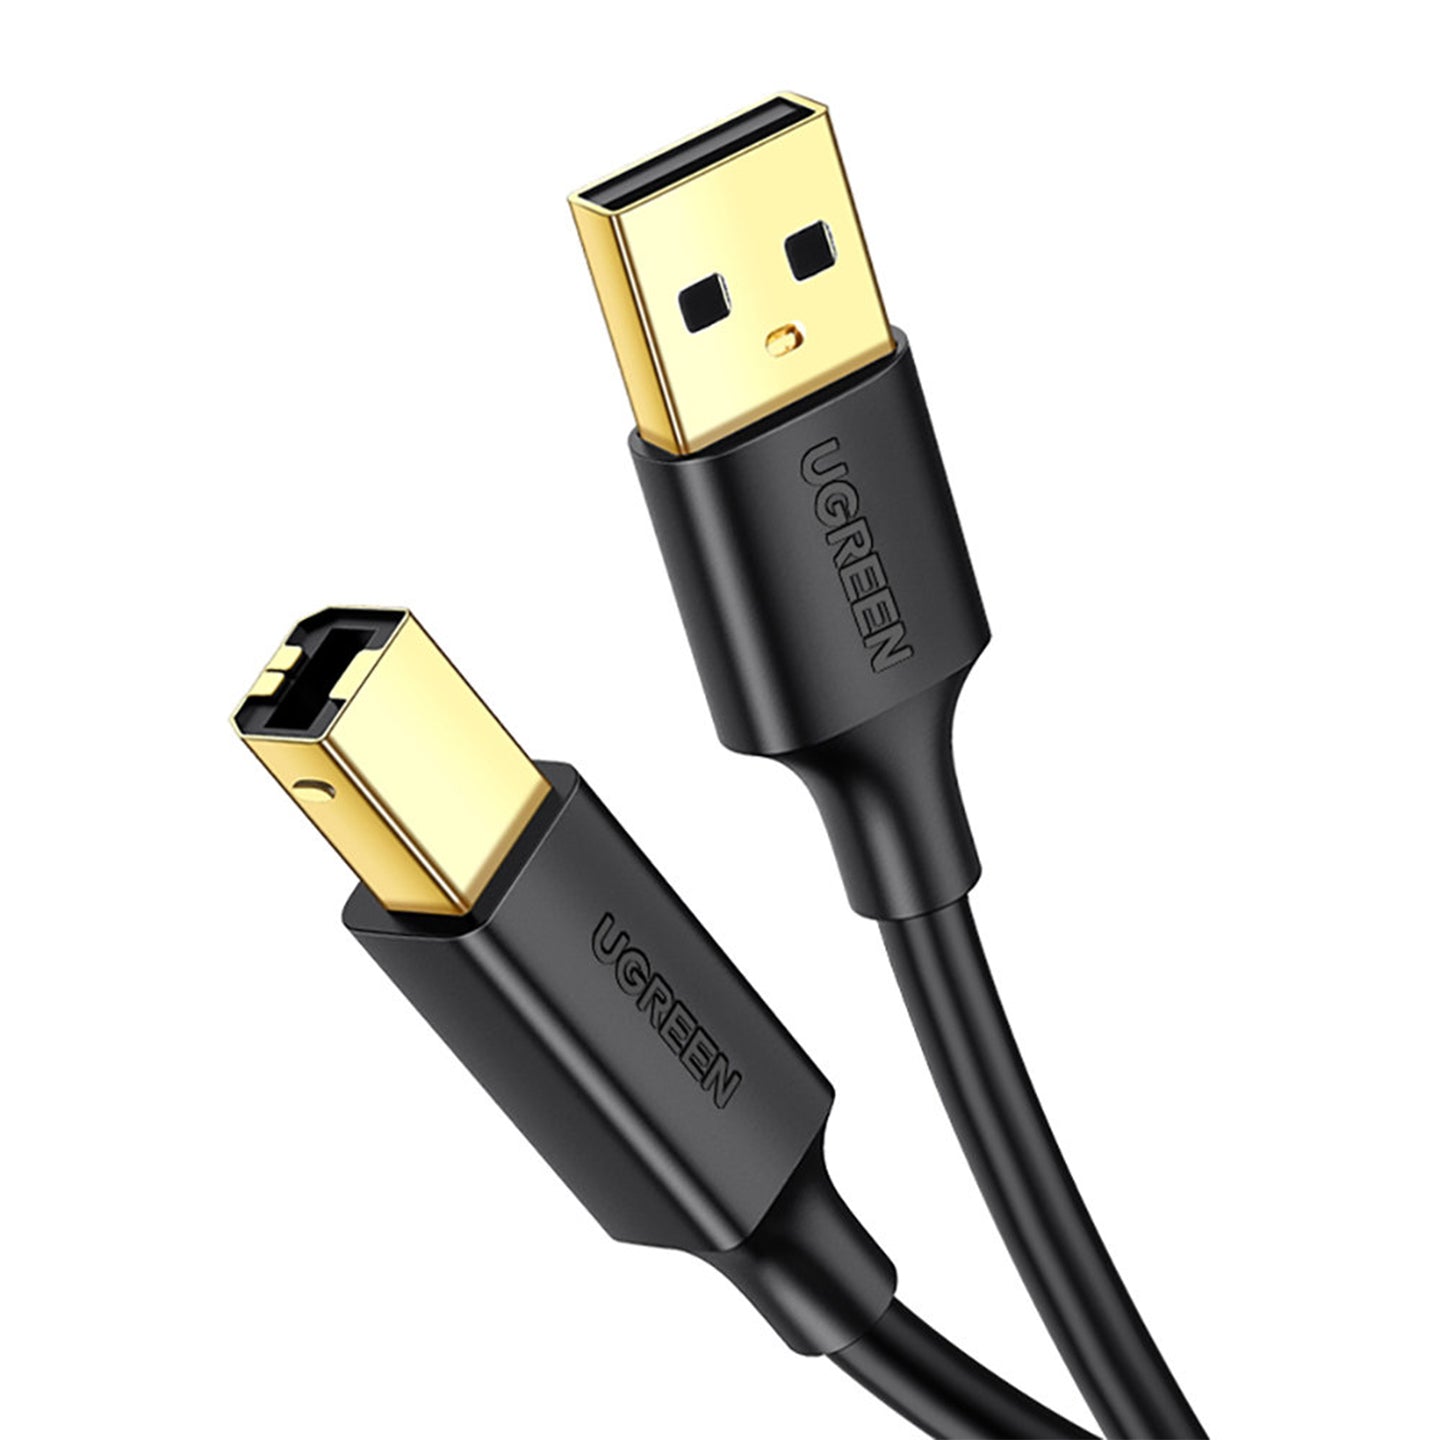 UGREEN USB 2.0 A Male to B Male Gold-Plated Printer Cable 480 Mbps Transfer Speed (Available in 1M, 2M) | 2084